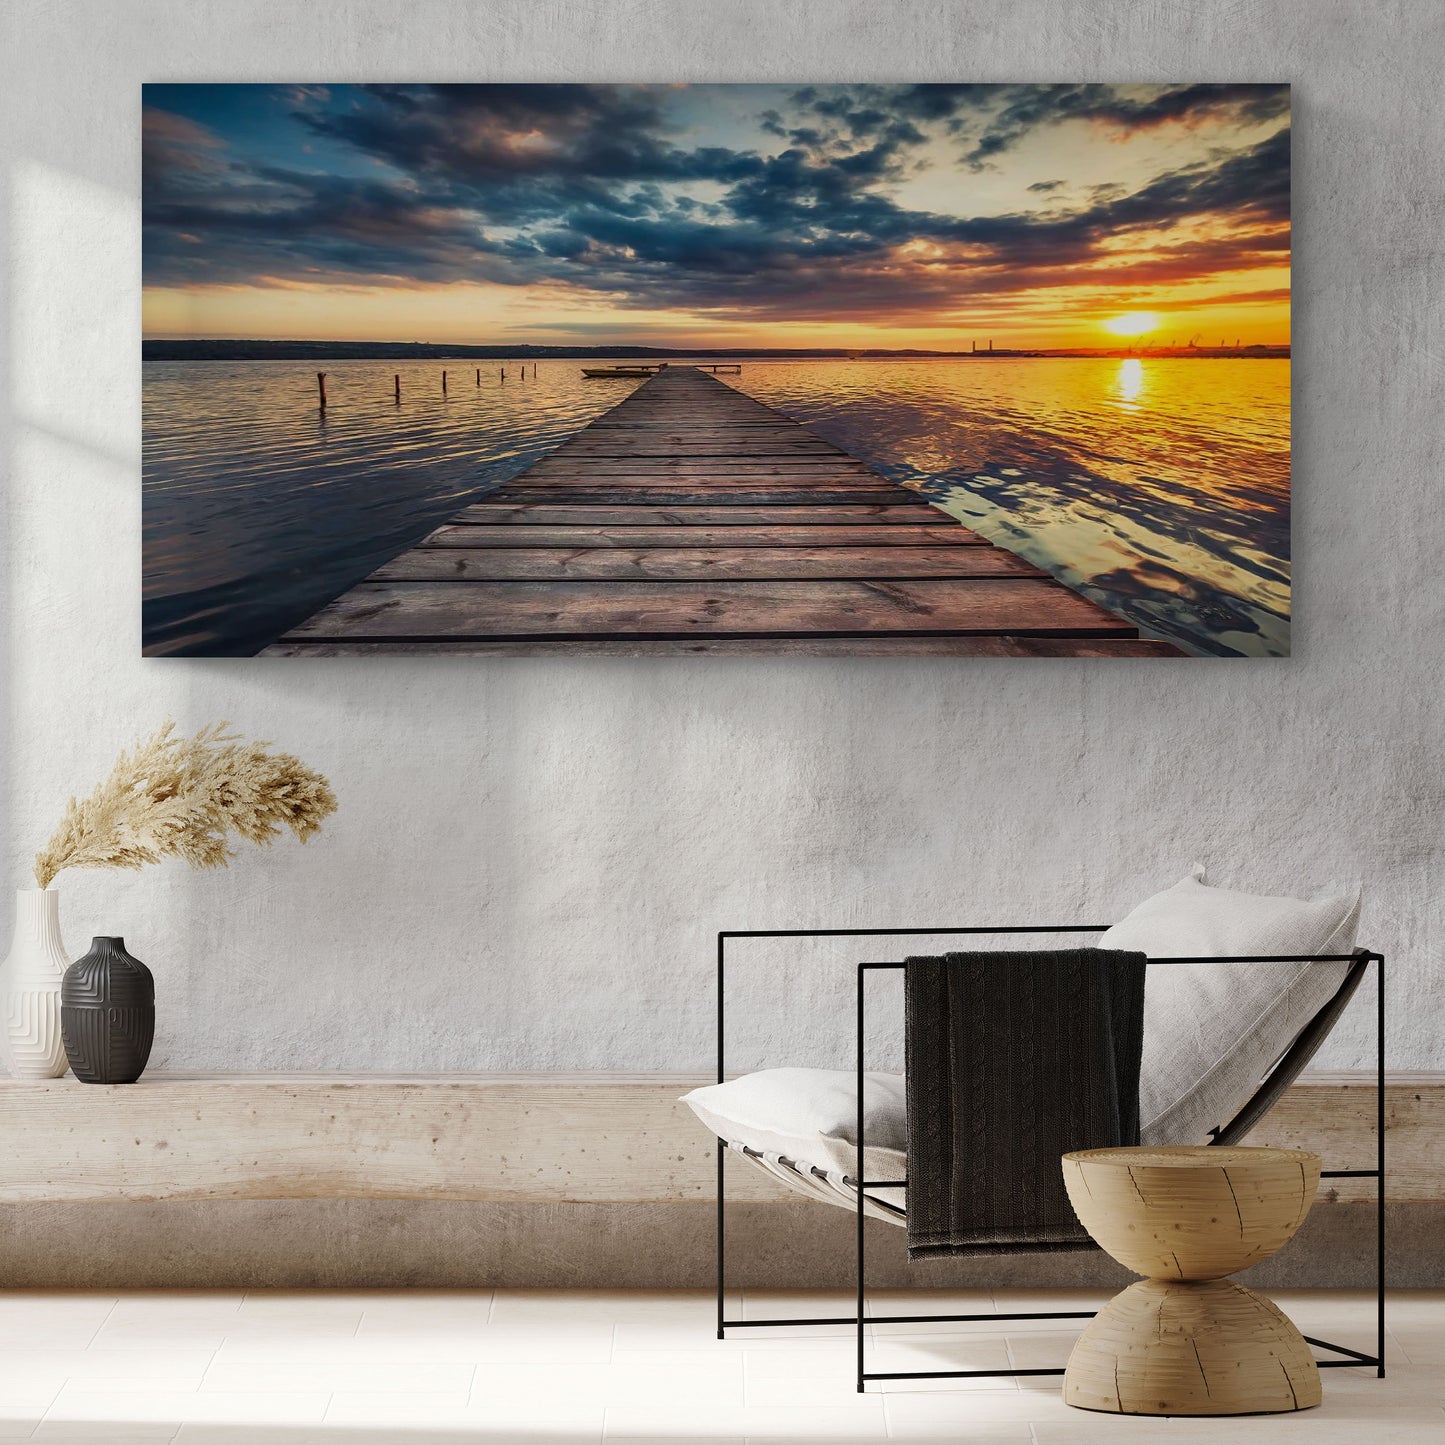 Small Dock By The Vibrant Lake Canvas Wall Art (Free Shipping)